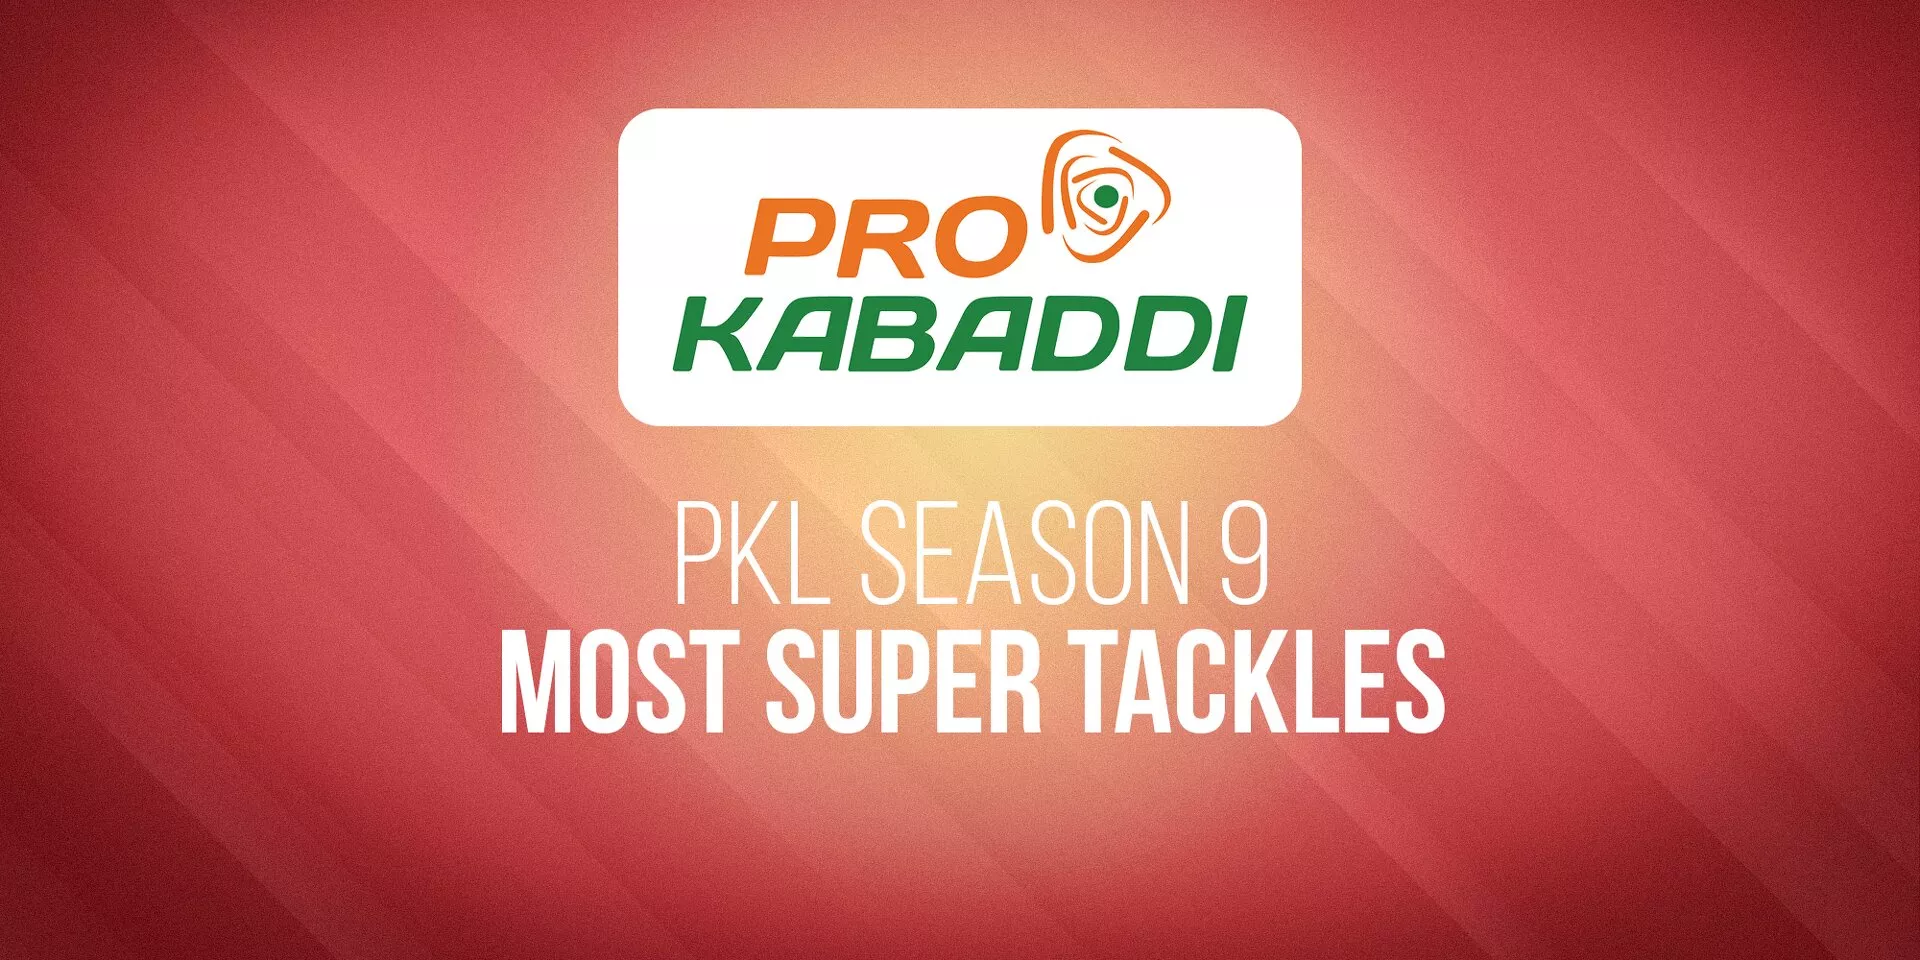 Top five defenders with most Super Tackles in PKL season 9